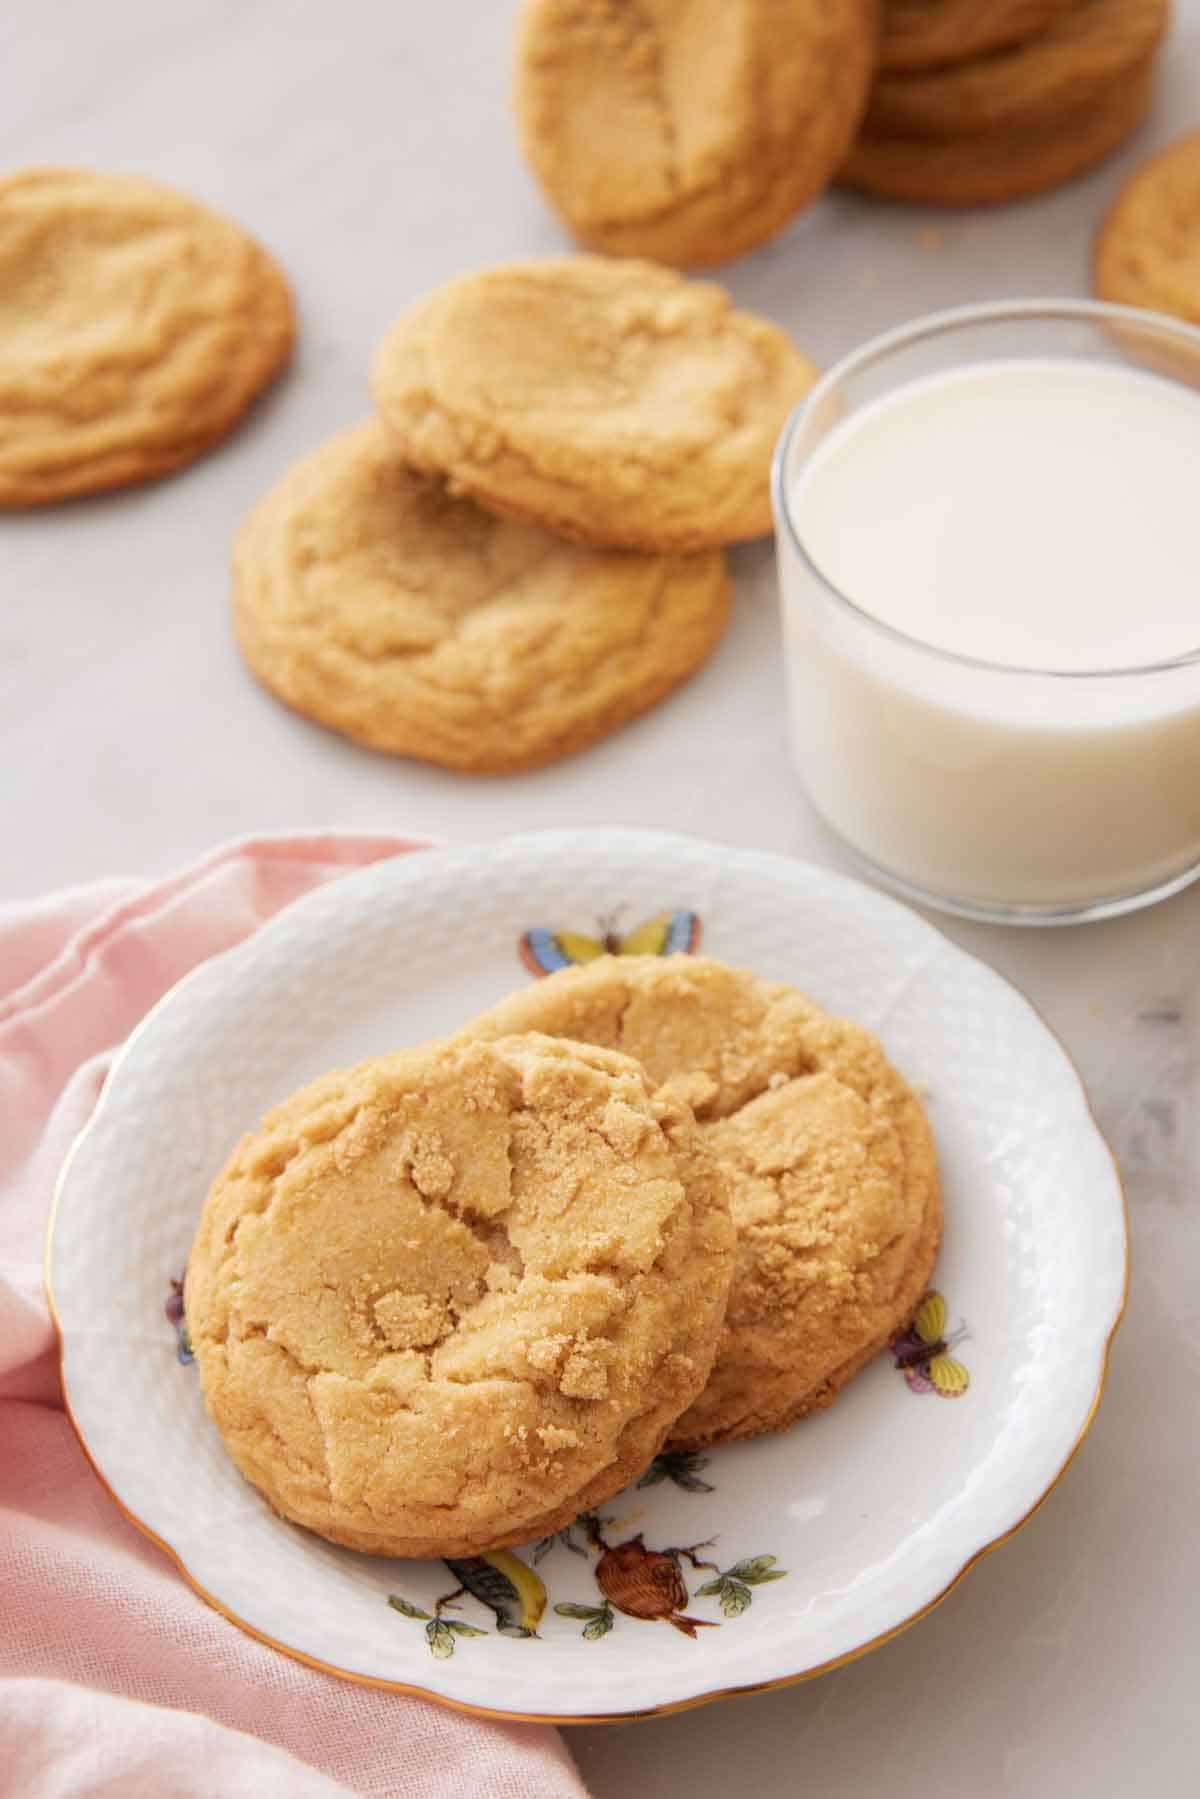 A plate with two brown sugar cookies with a glass of milk and more cookies in the back.